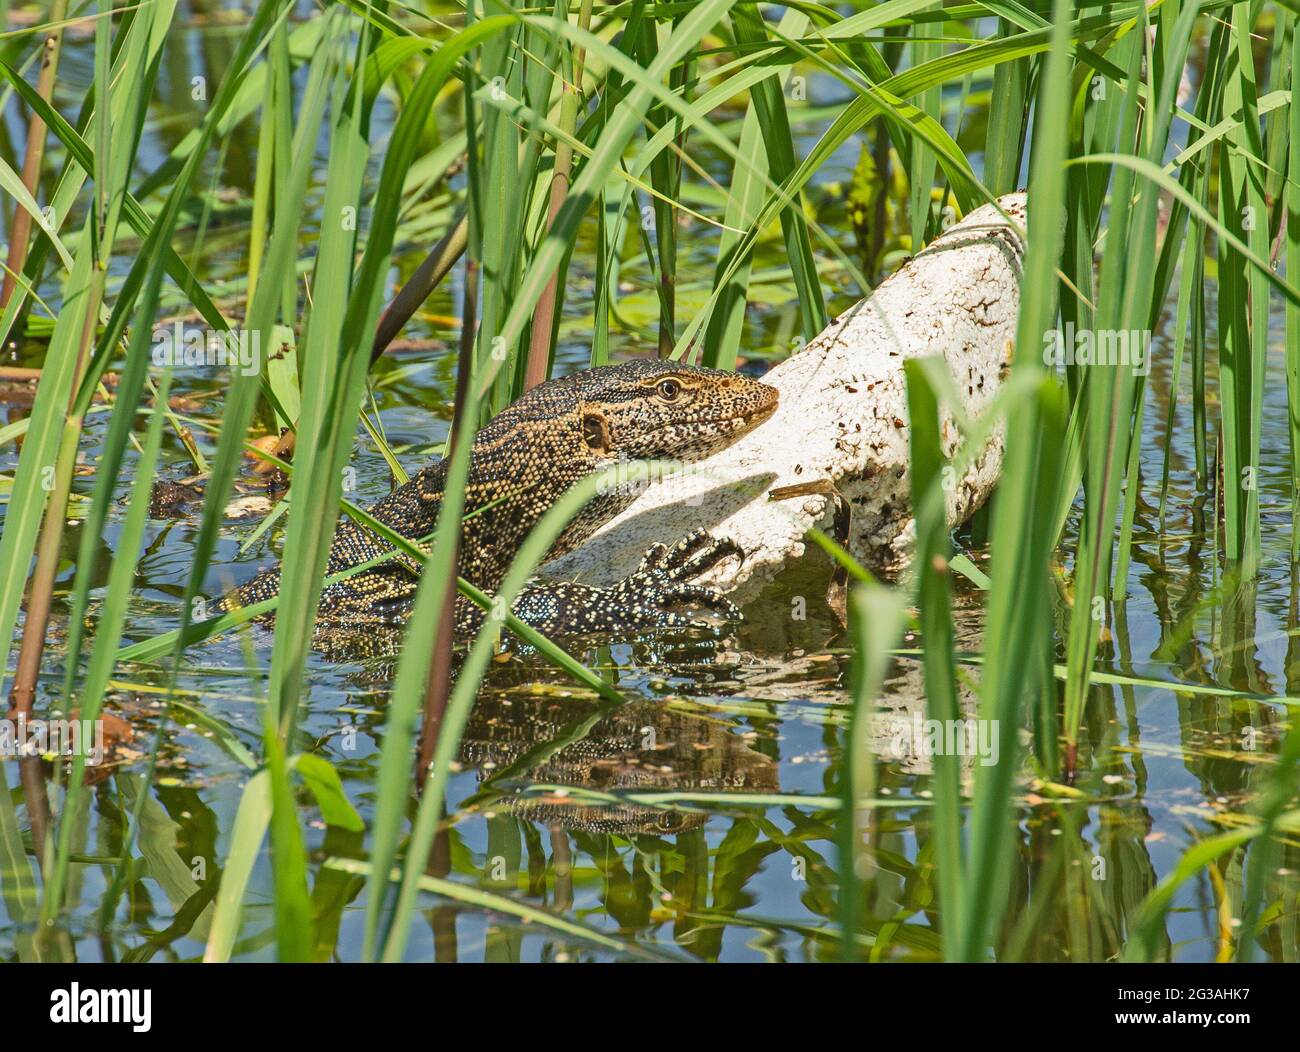 Nile monitor lizard varanus niloticus hiding on piece of polystyrene pollution by river bank wetland in grass reeds Stock Photo